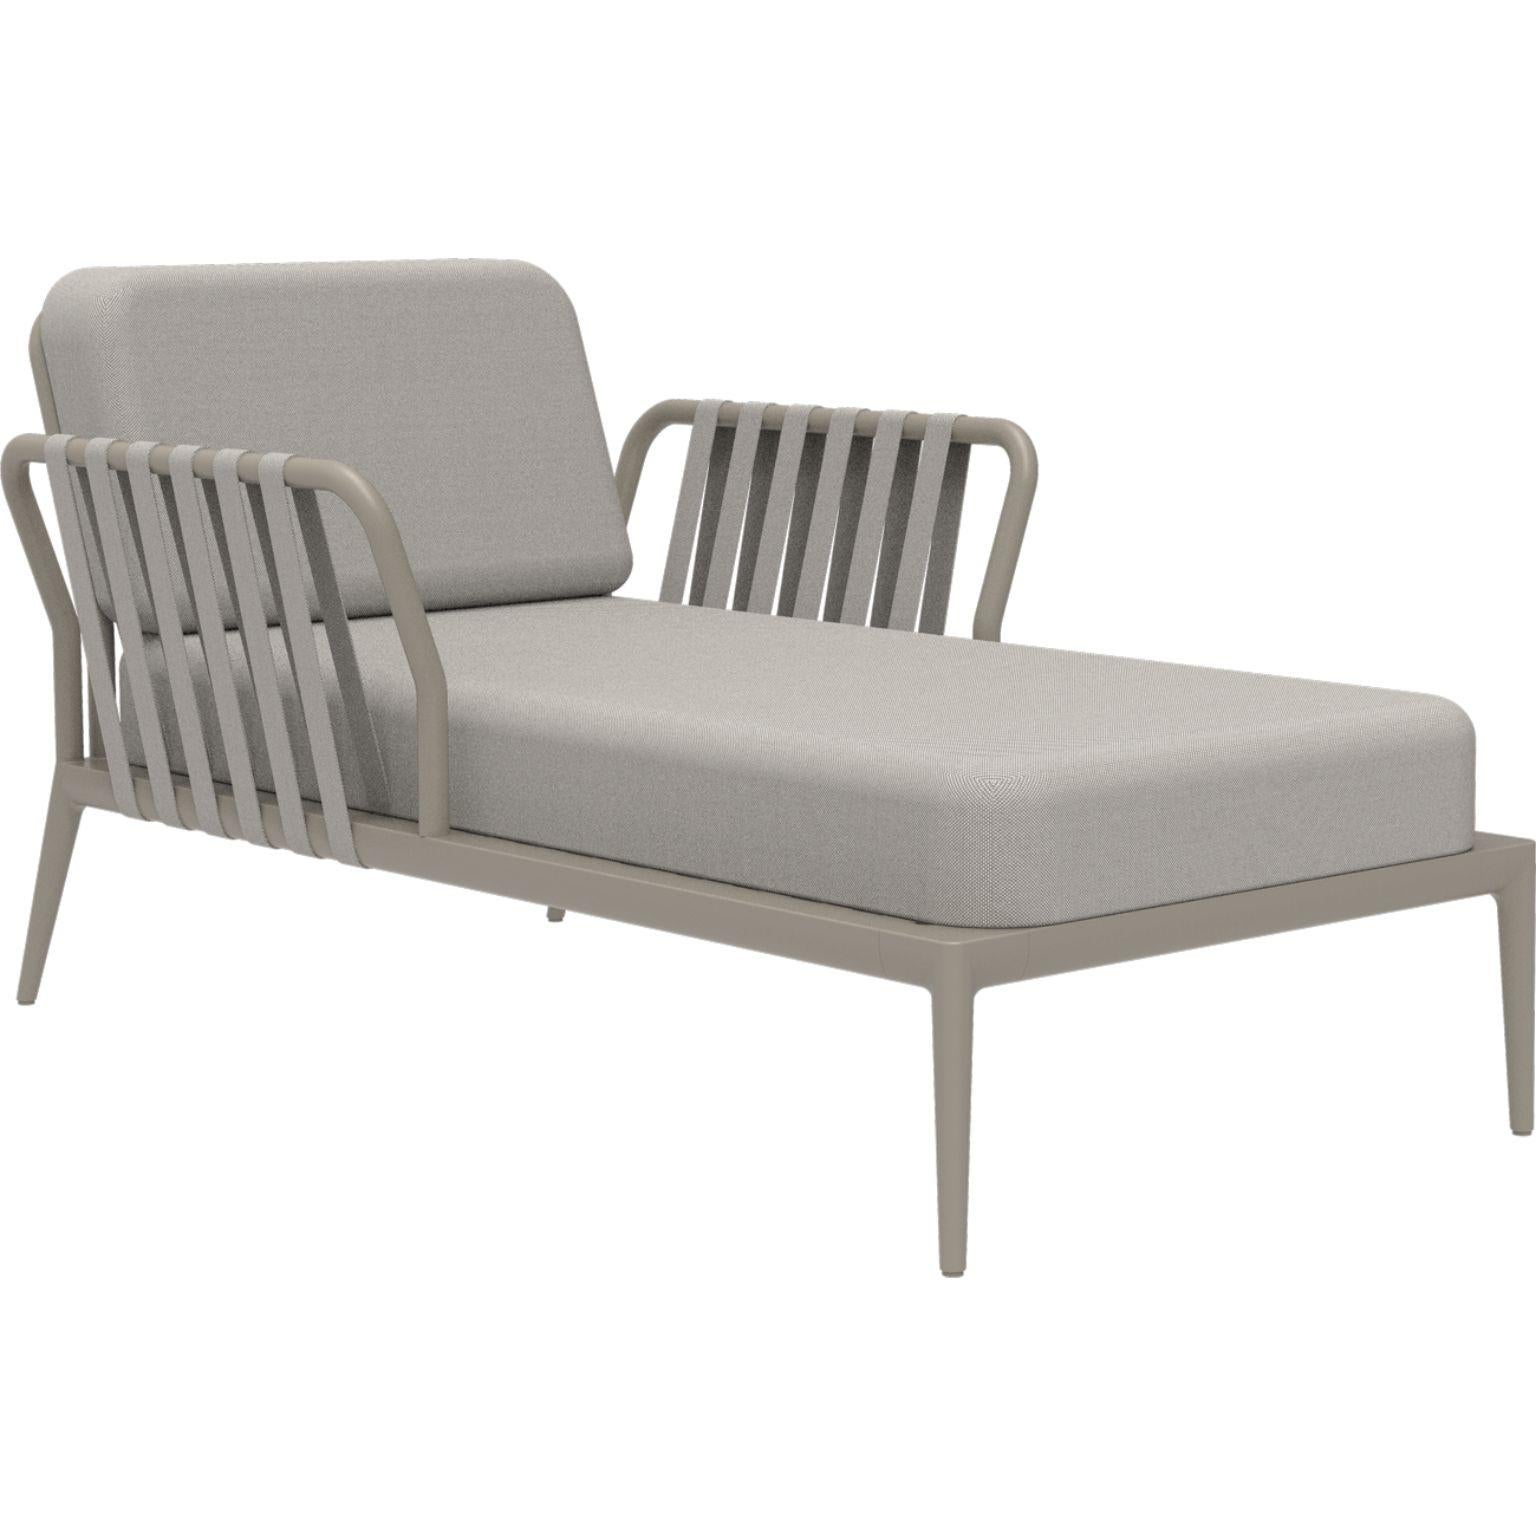 Ribbons Cream Divan by MOWEE
Dimensions: D91 x W155 x H81 cm (seat height 42cm)
Material: Aluminum and upholstery.
Weight: 30 kg.
Also available in different colors and finishes. 

An unmistakable collection for its beauty and robustness. A